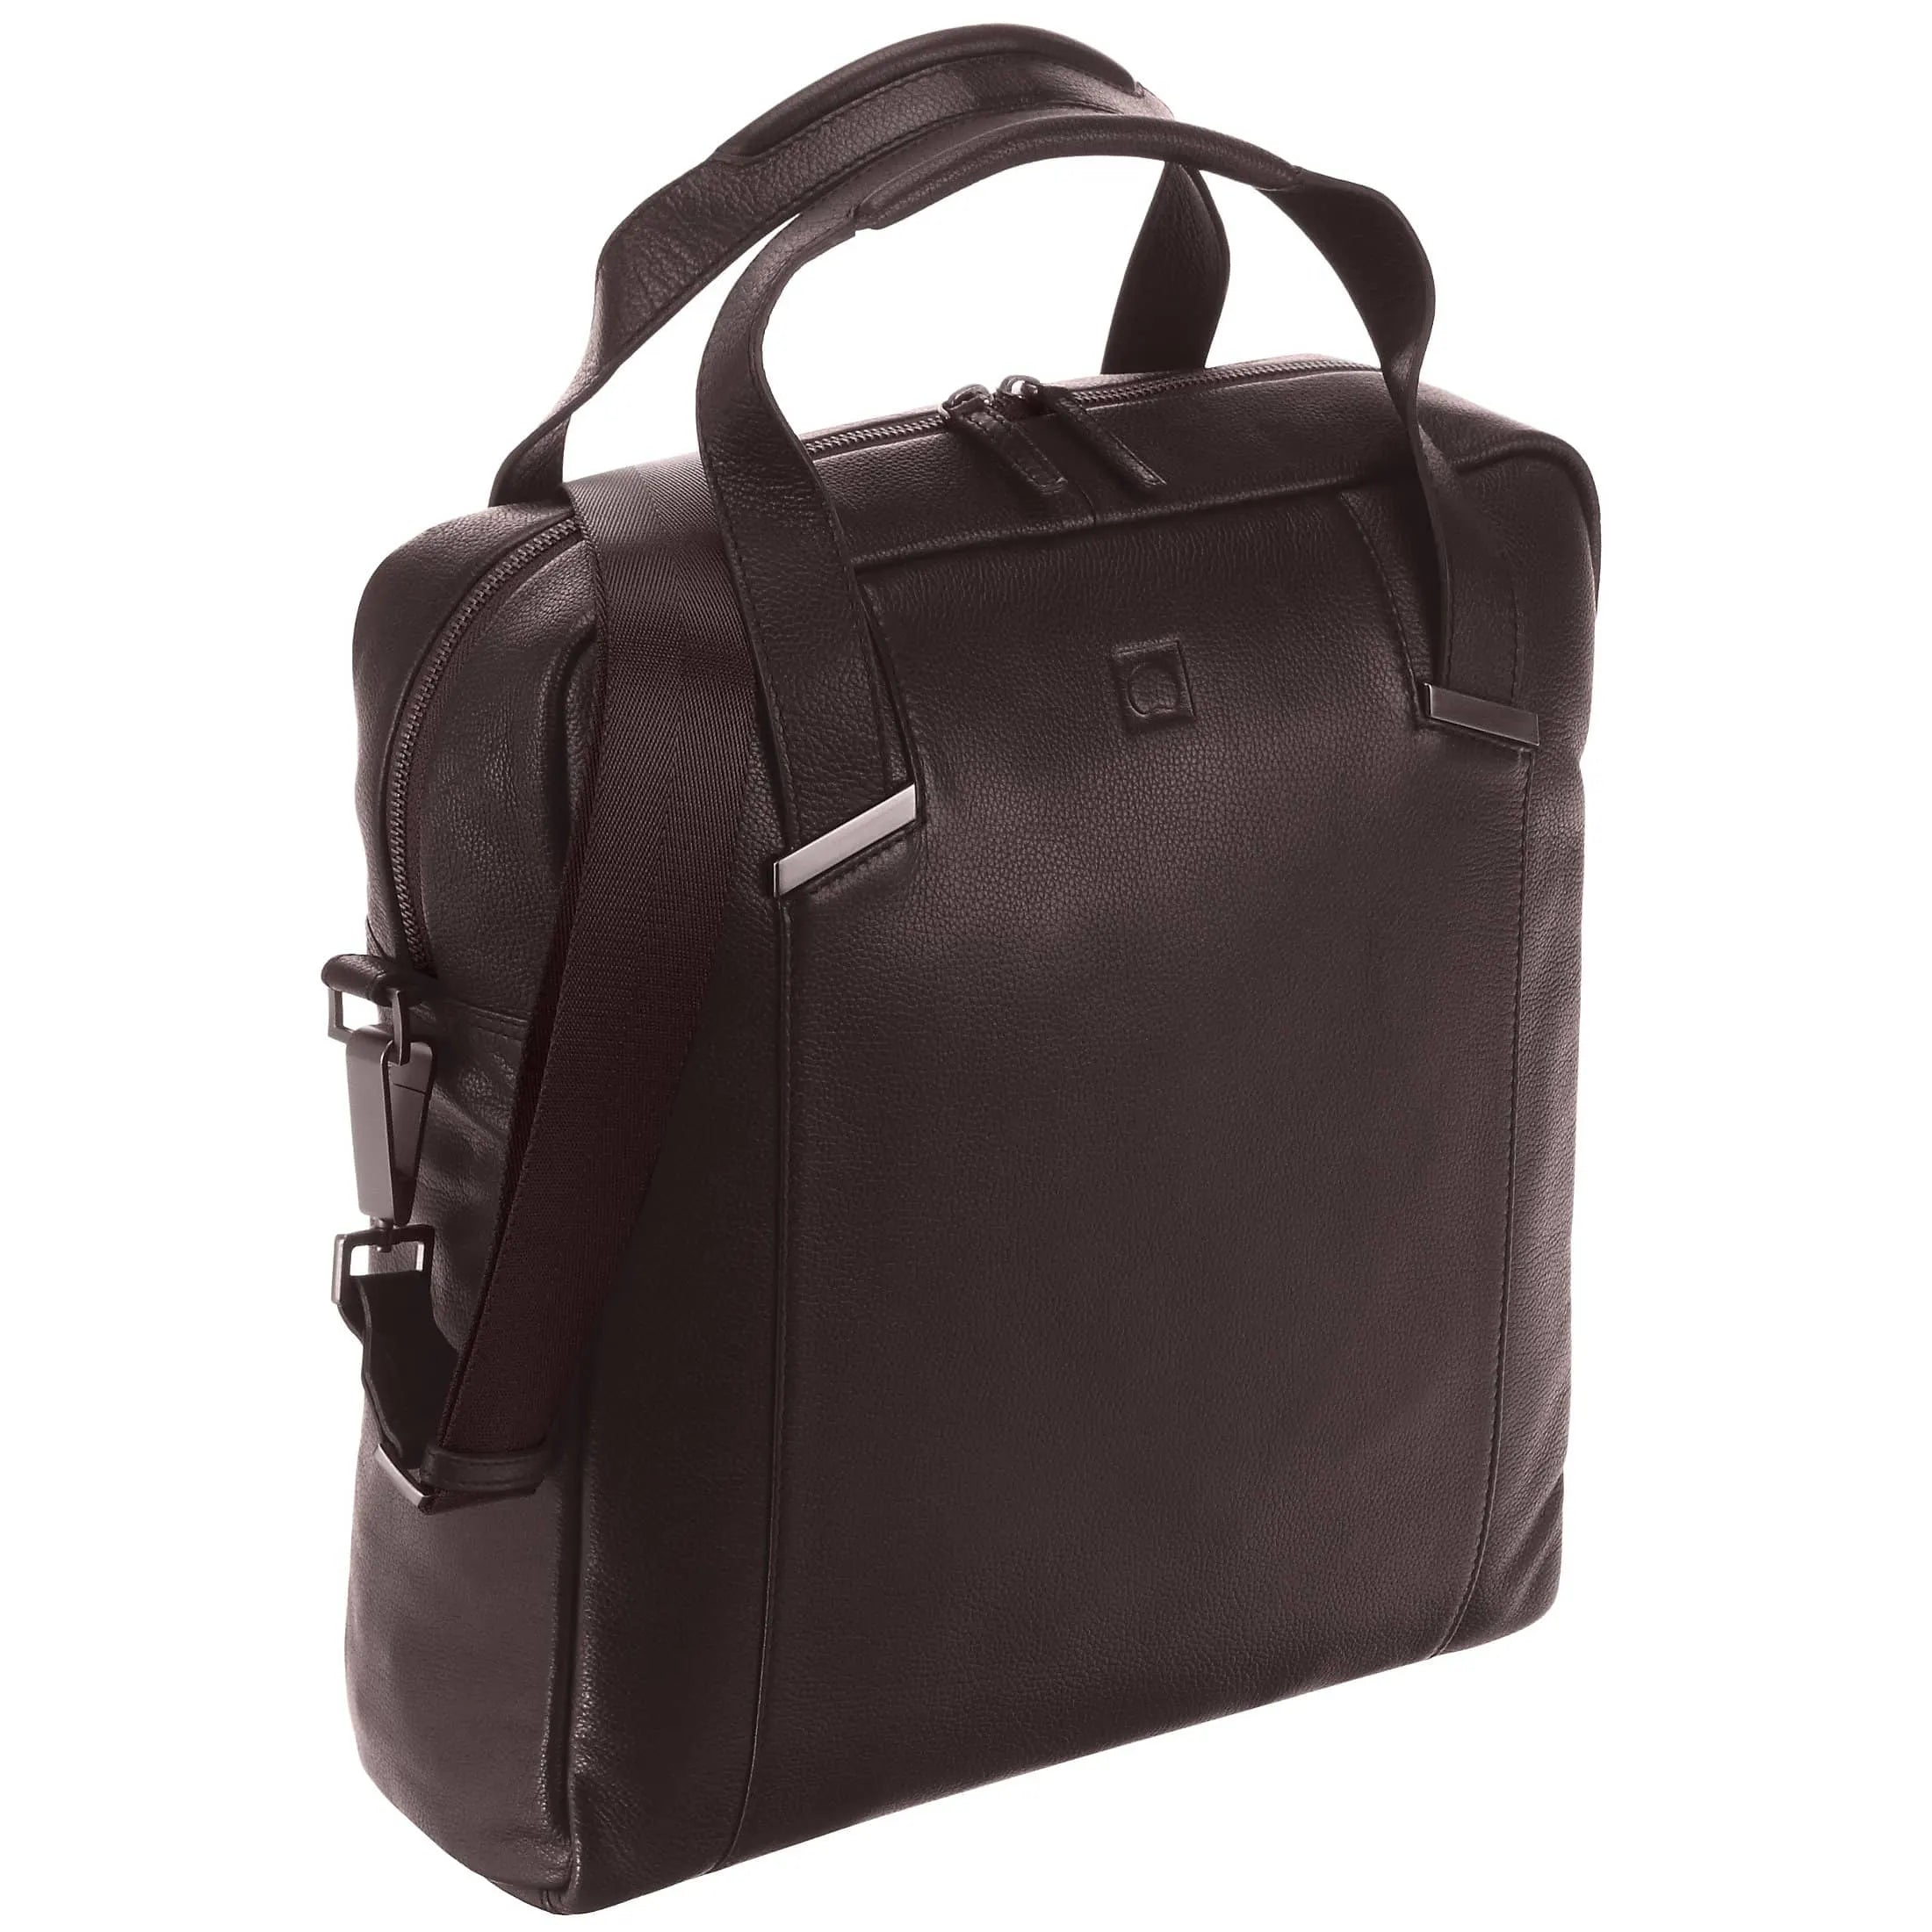 Delsey Haussmann briefcase with laptop compartment 37 cm - brown